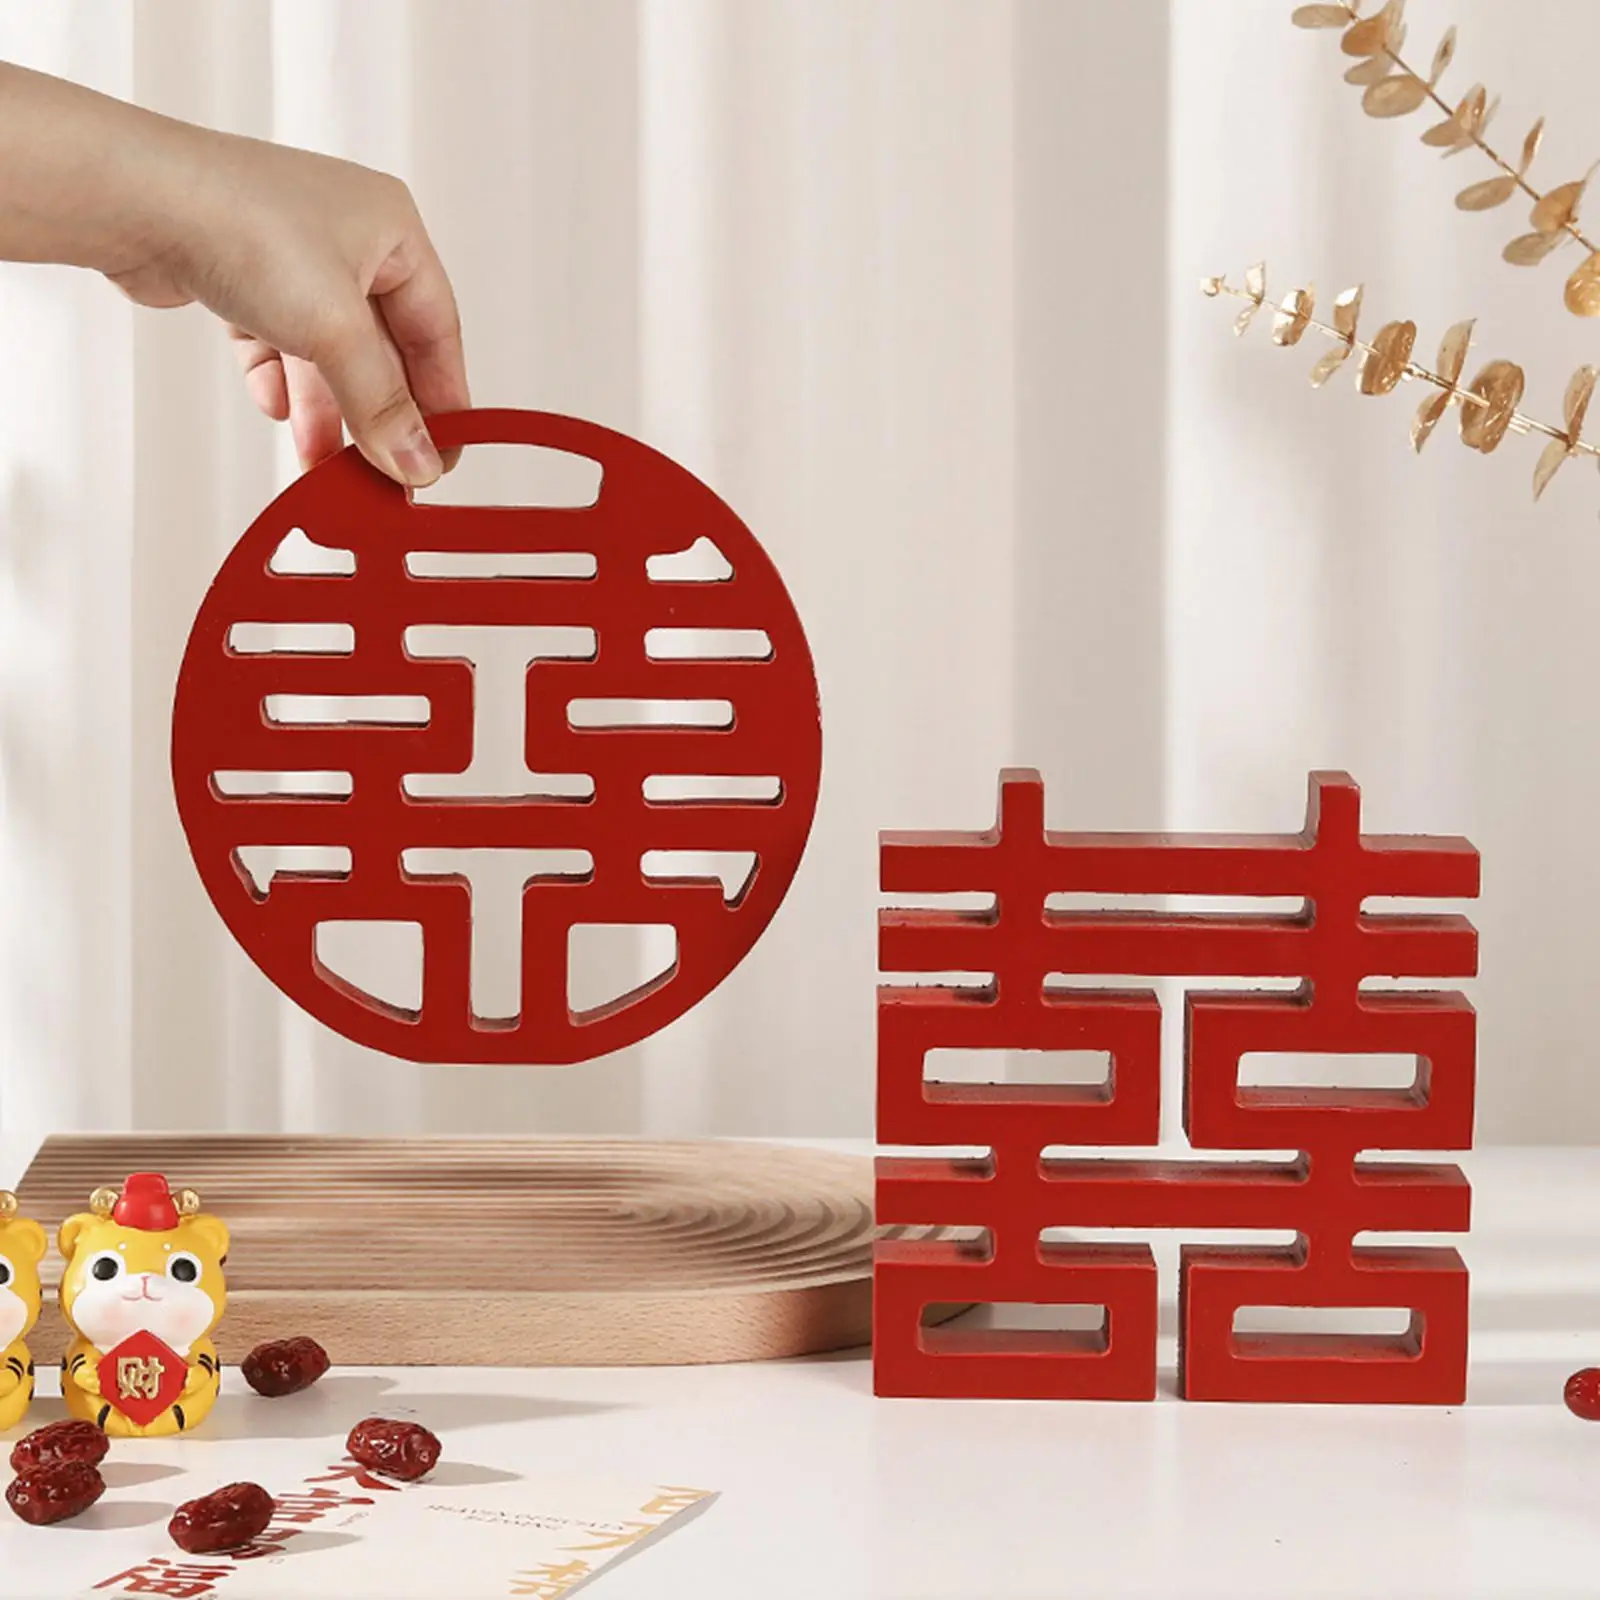 Festival Traditional Wedding Xi Chinese Character Wall Table Wooden Ornaments Living Room Decor Decorative Creative Portable DIY